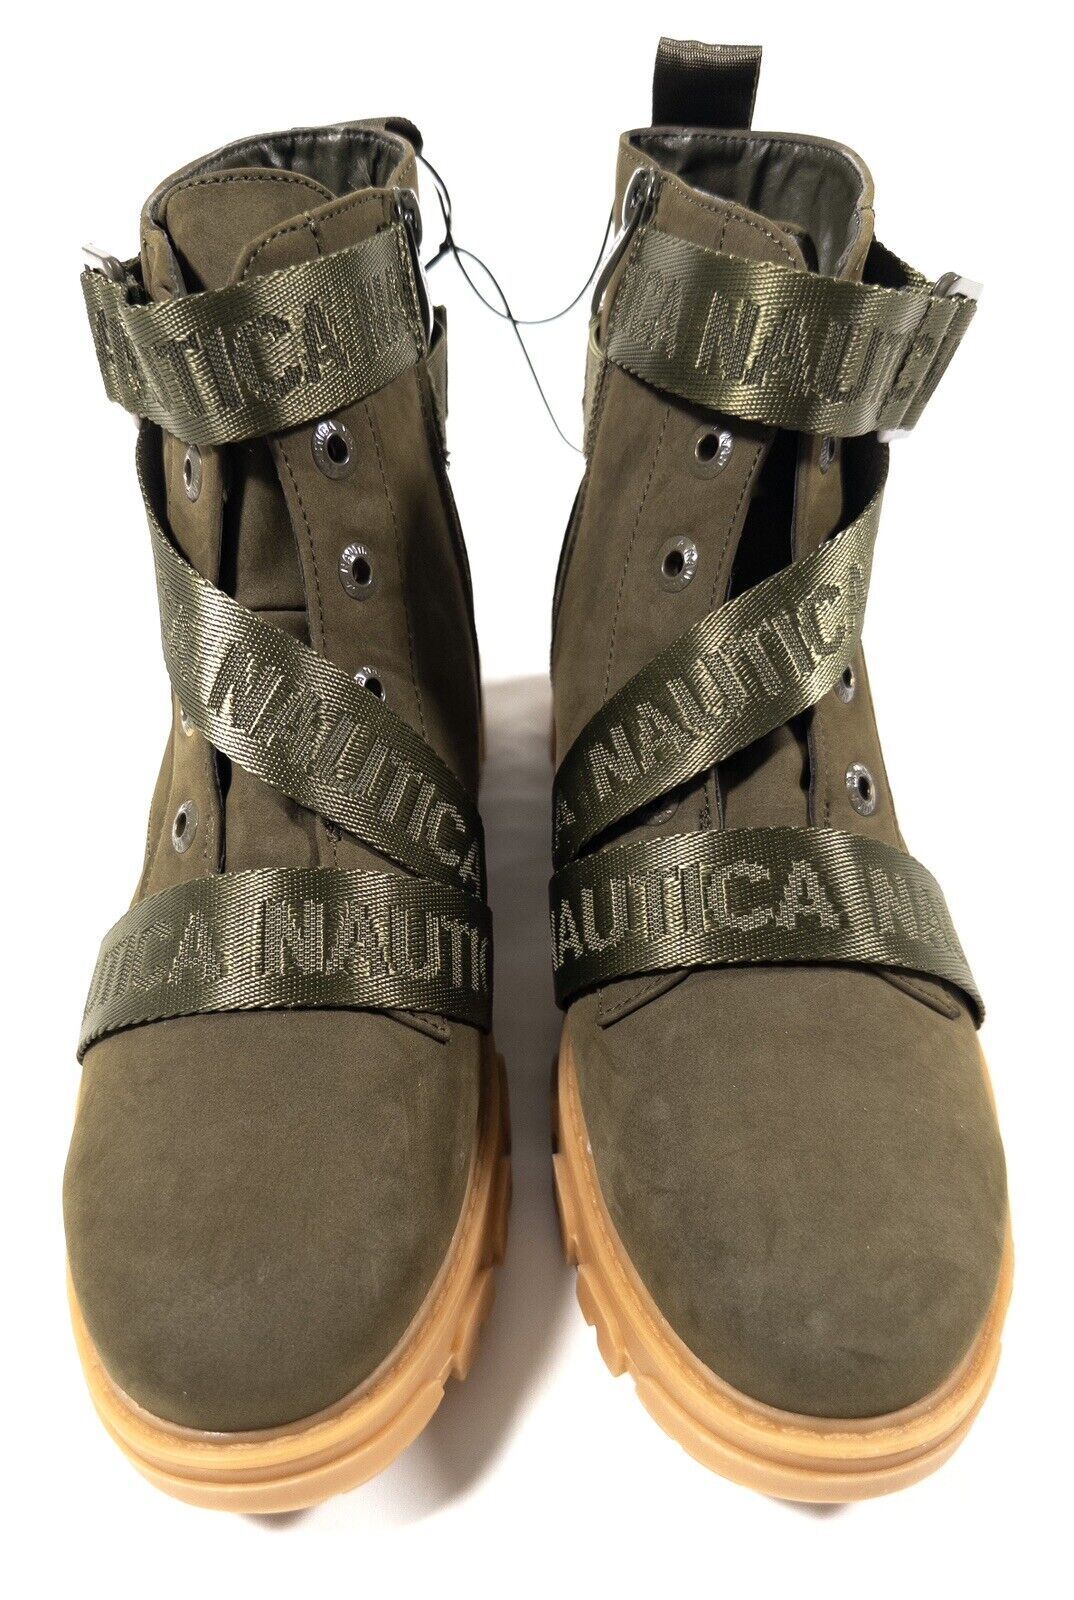 NAUTICA Womens Olive Green Crossover Strap Chunky Boots Size UK 7